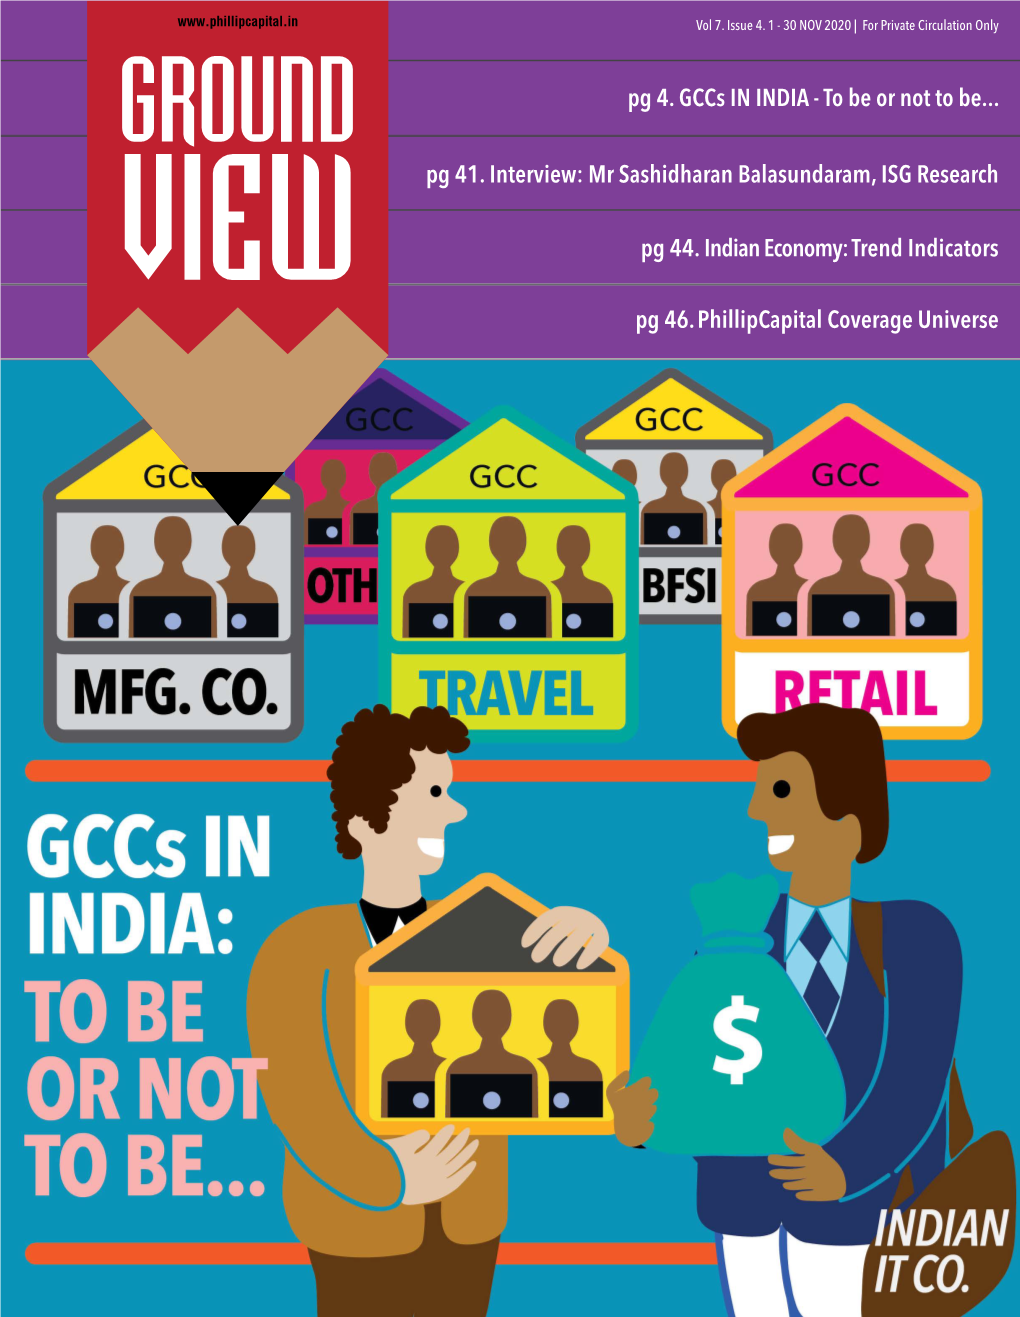 Pg 4. Gccs in INDIA - to Be Or Not to Be